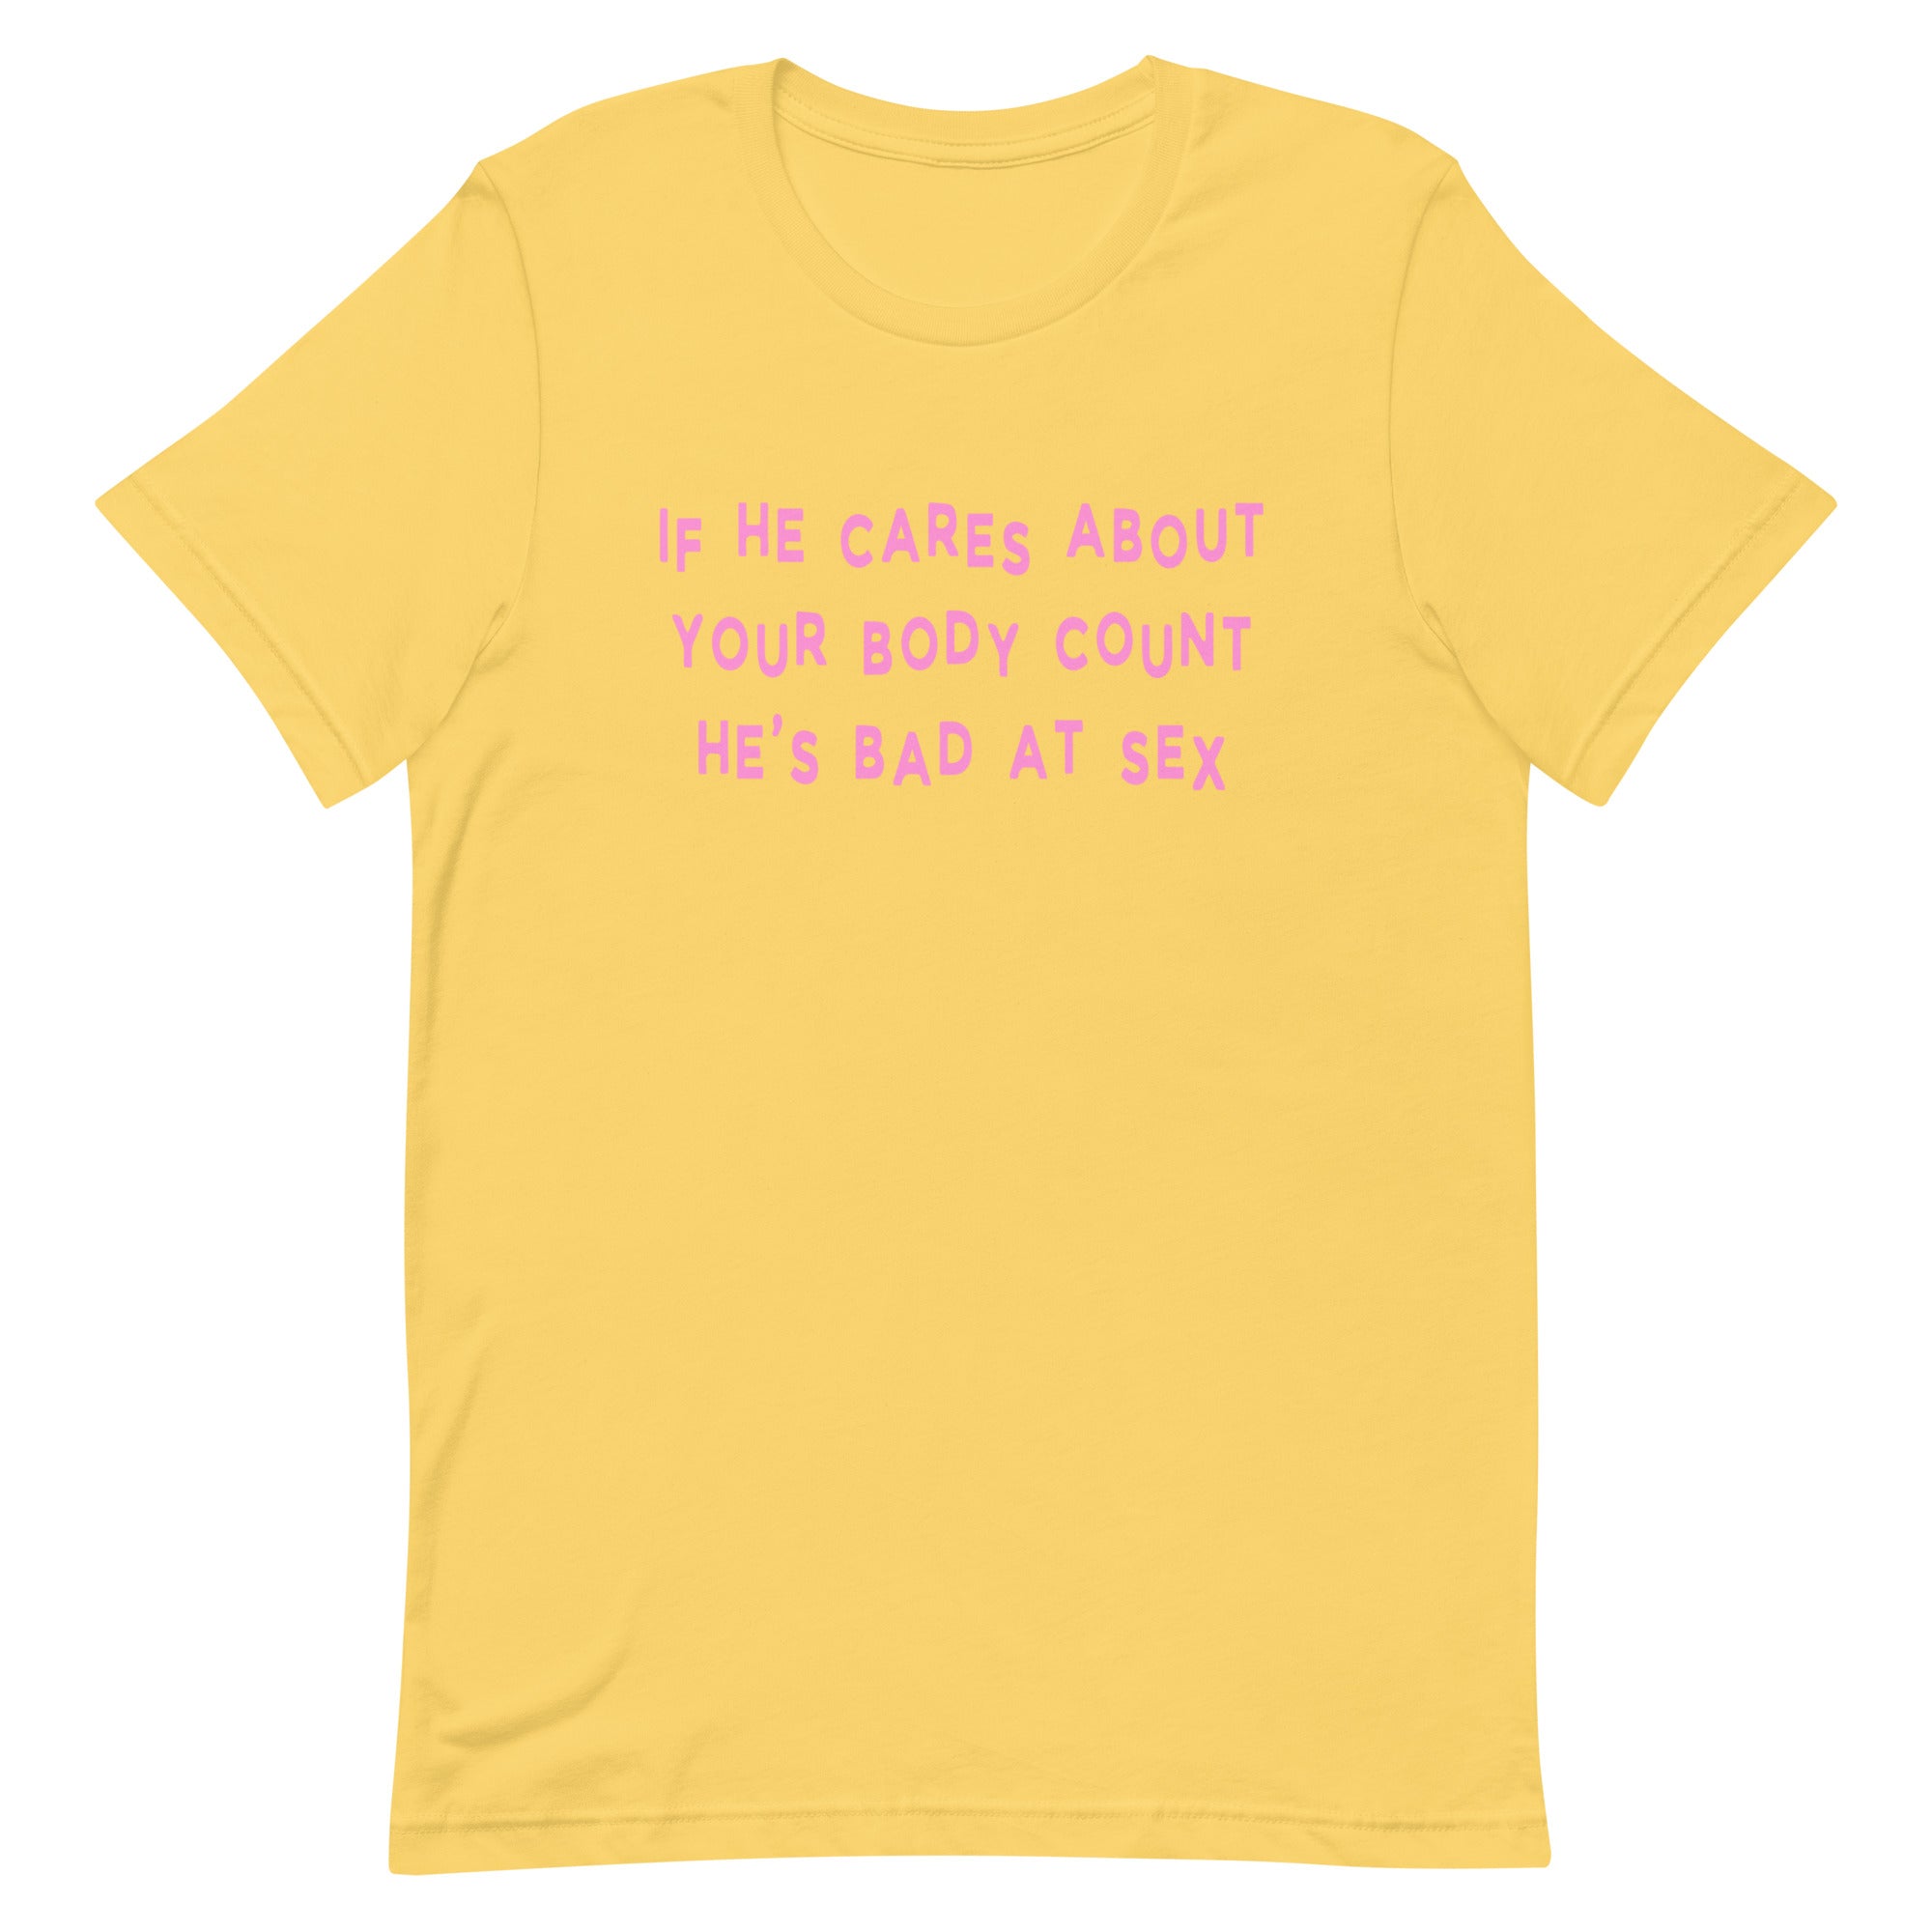 If He Cares About Your Body Count He’s Bad At Sex Unisex Feminist T-shirt - Shop Women’s Rights T-shirts - Feminist Trash Store - Yellow